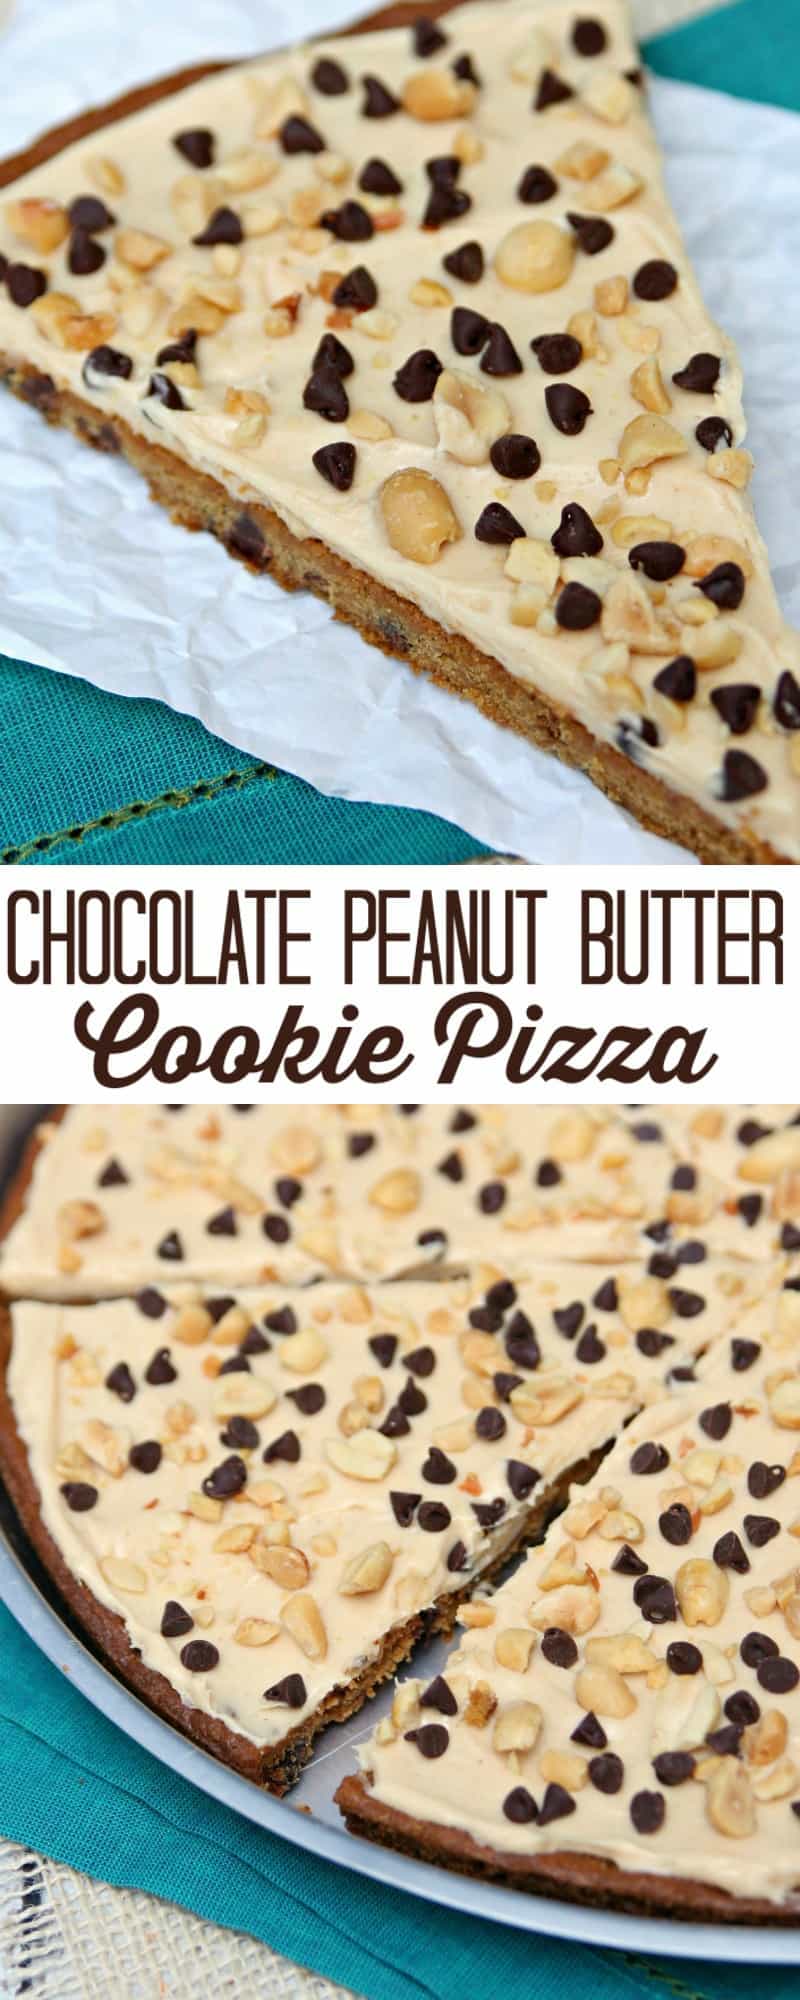 Chocolate Peanut Butter Cookie Pizza 